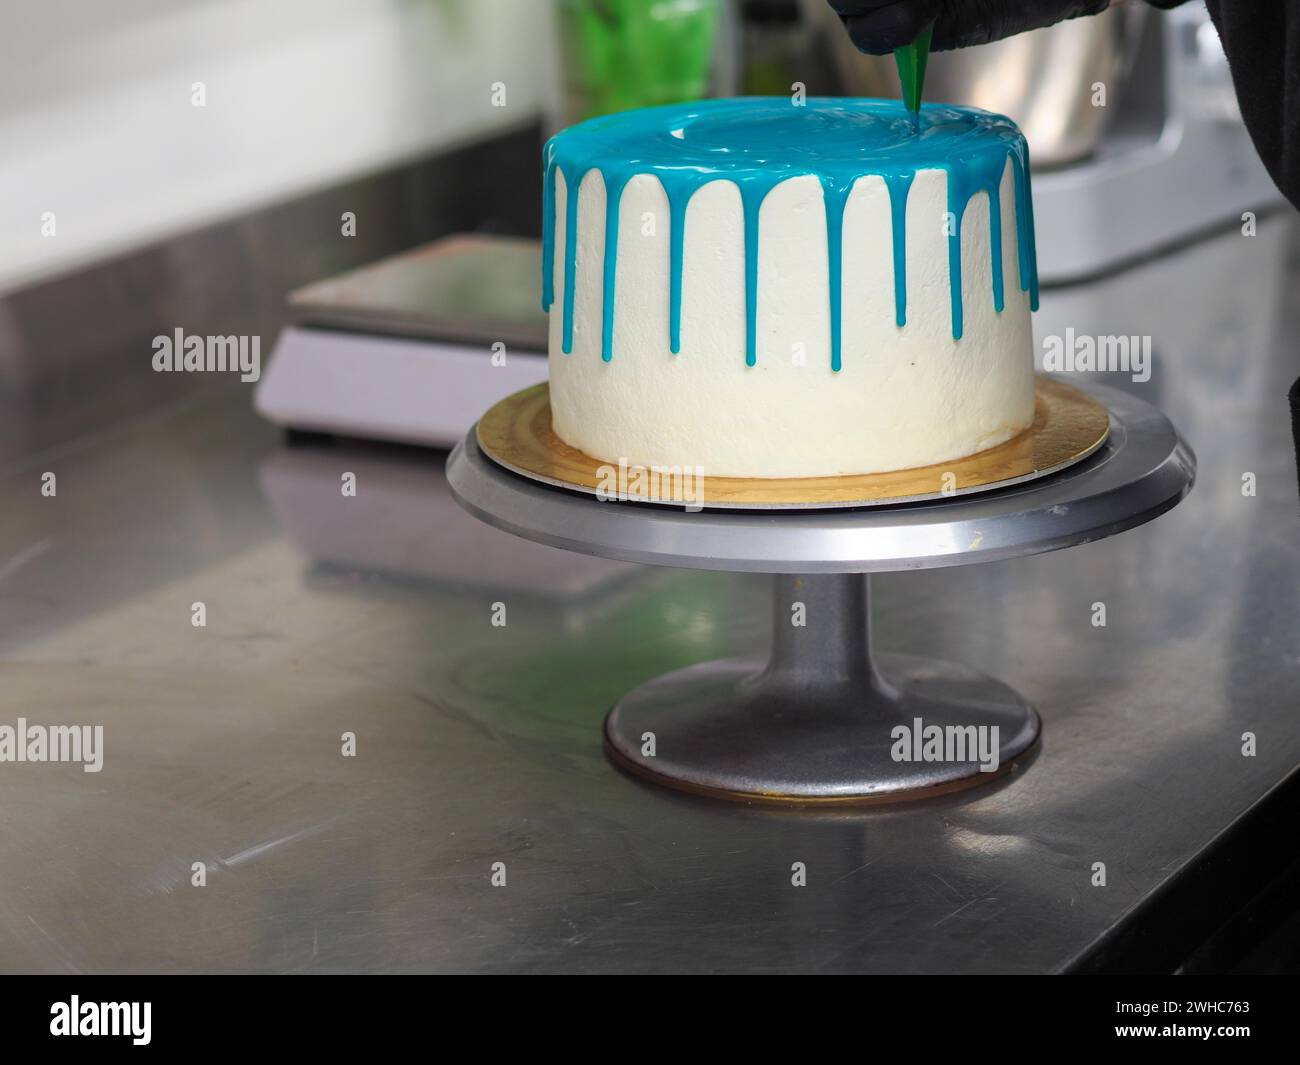 A frosted cake with white frosting being decorated with blue icing on a kitchen counter by pastry chef wearing black latex gloves Stock Photo